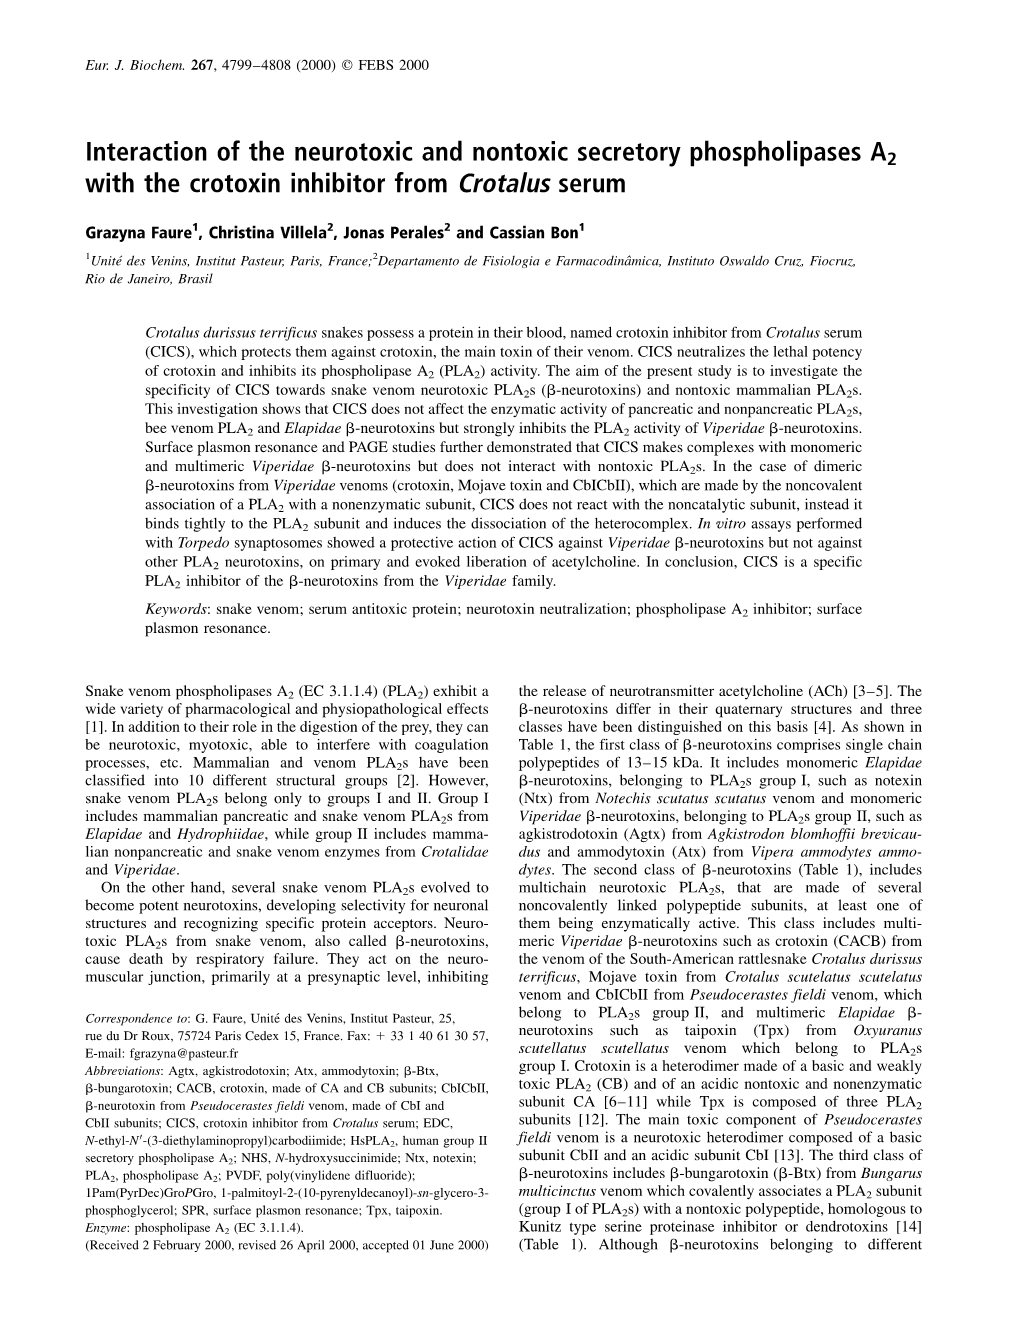 Interaction of the Neurotoxic and Nontoxic Secretory Phospholipases A2 with the Crotoxin Inhibitor from Crotalus Serum